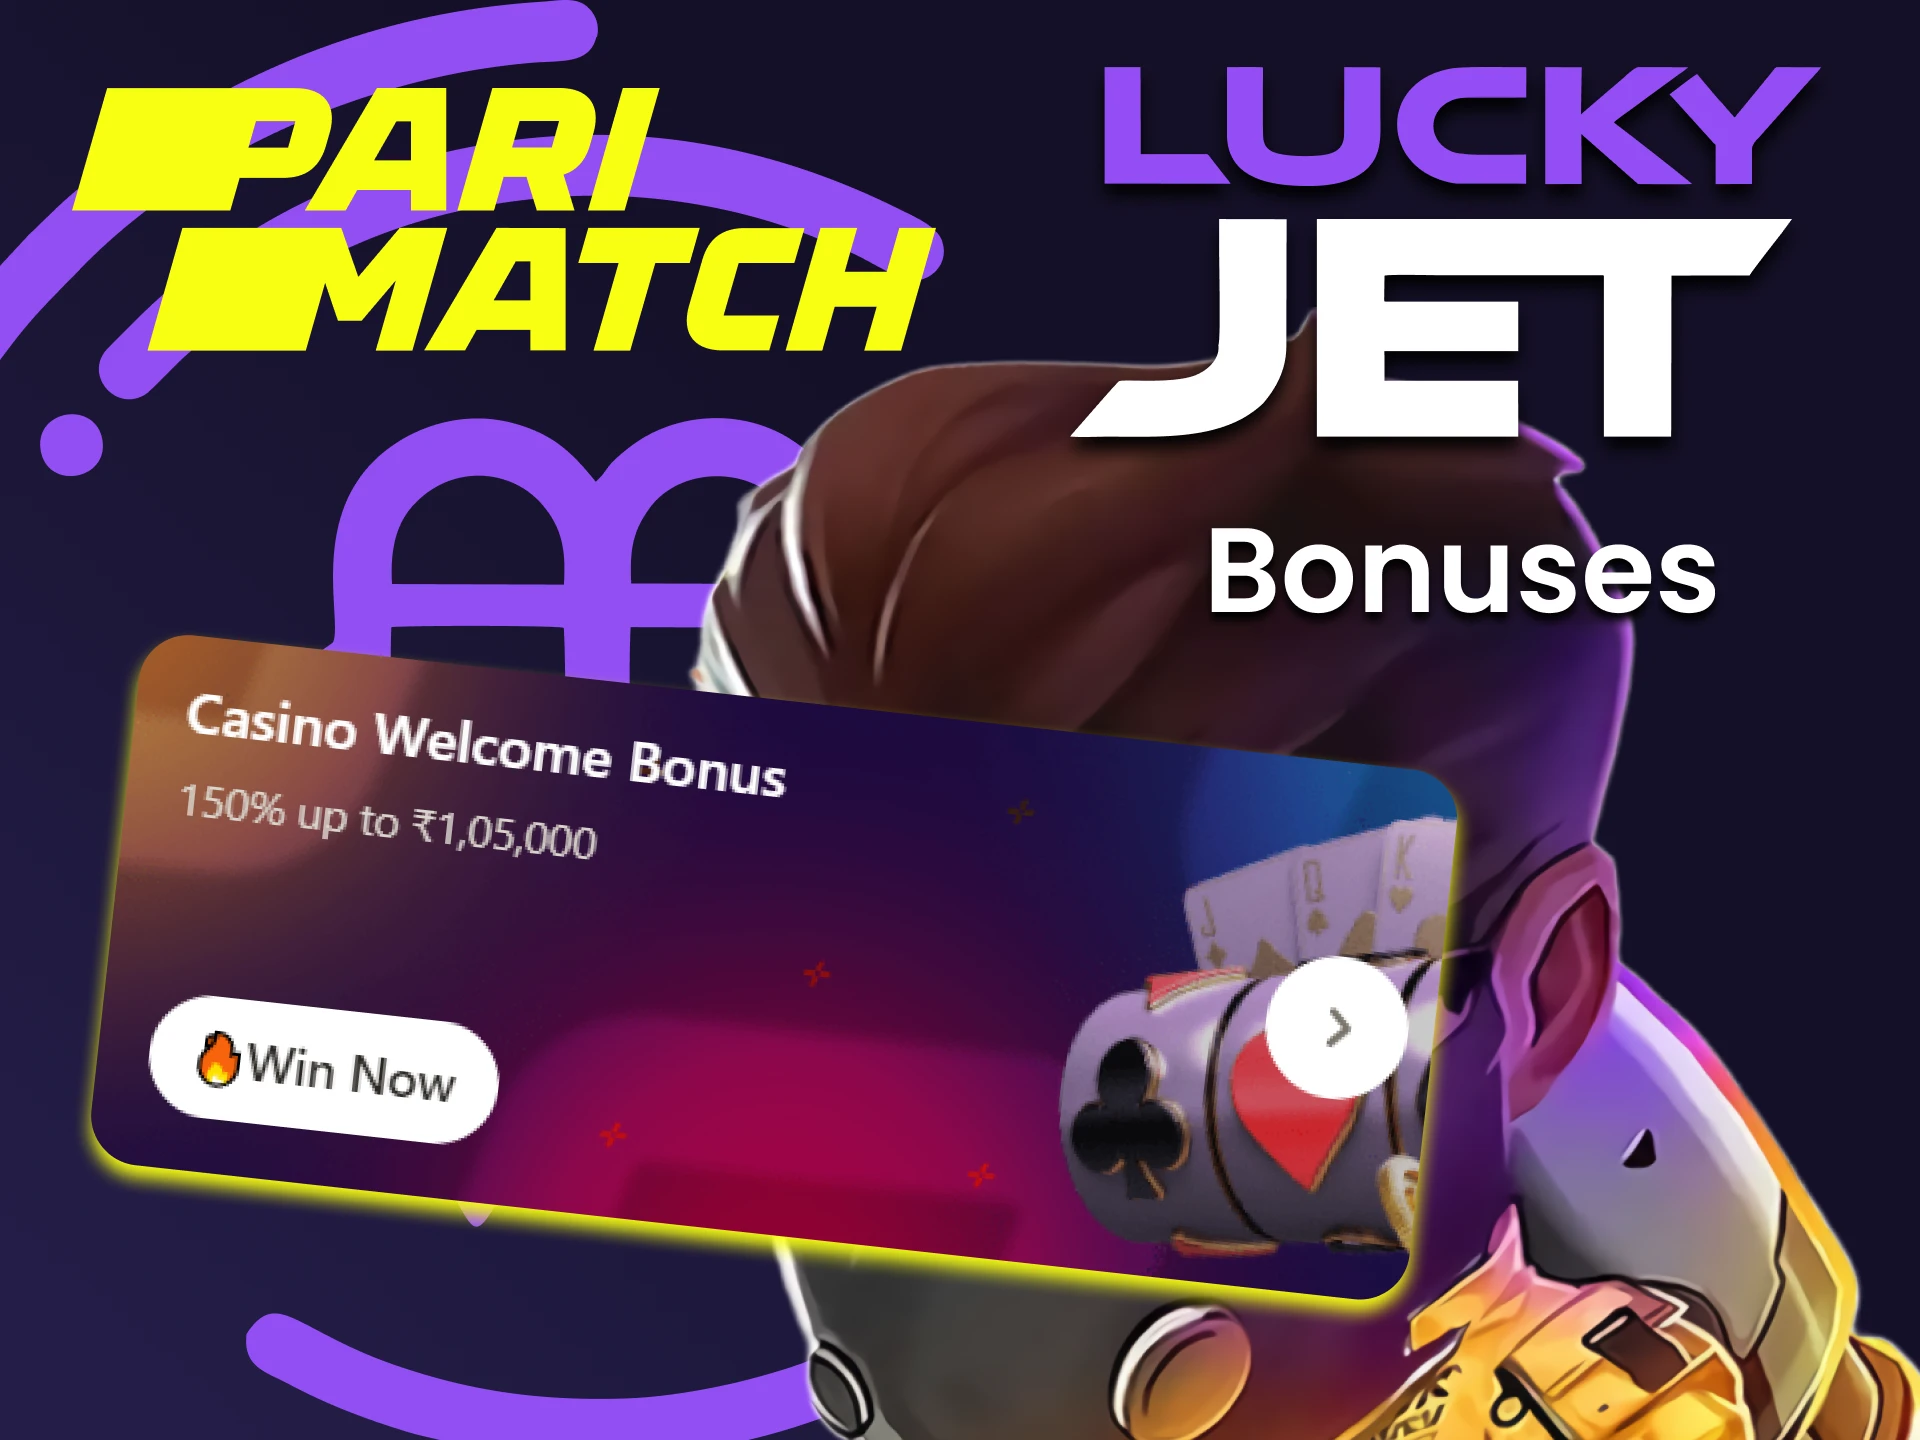 Get bonuses for playing Lucky Jet from Parimatch.